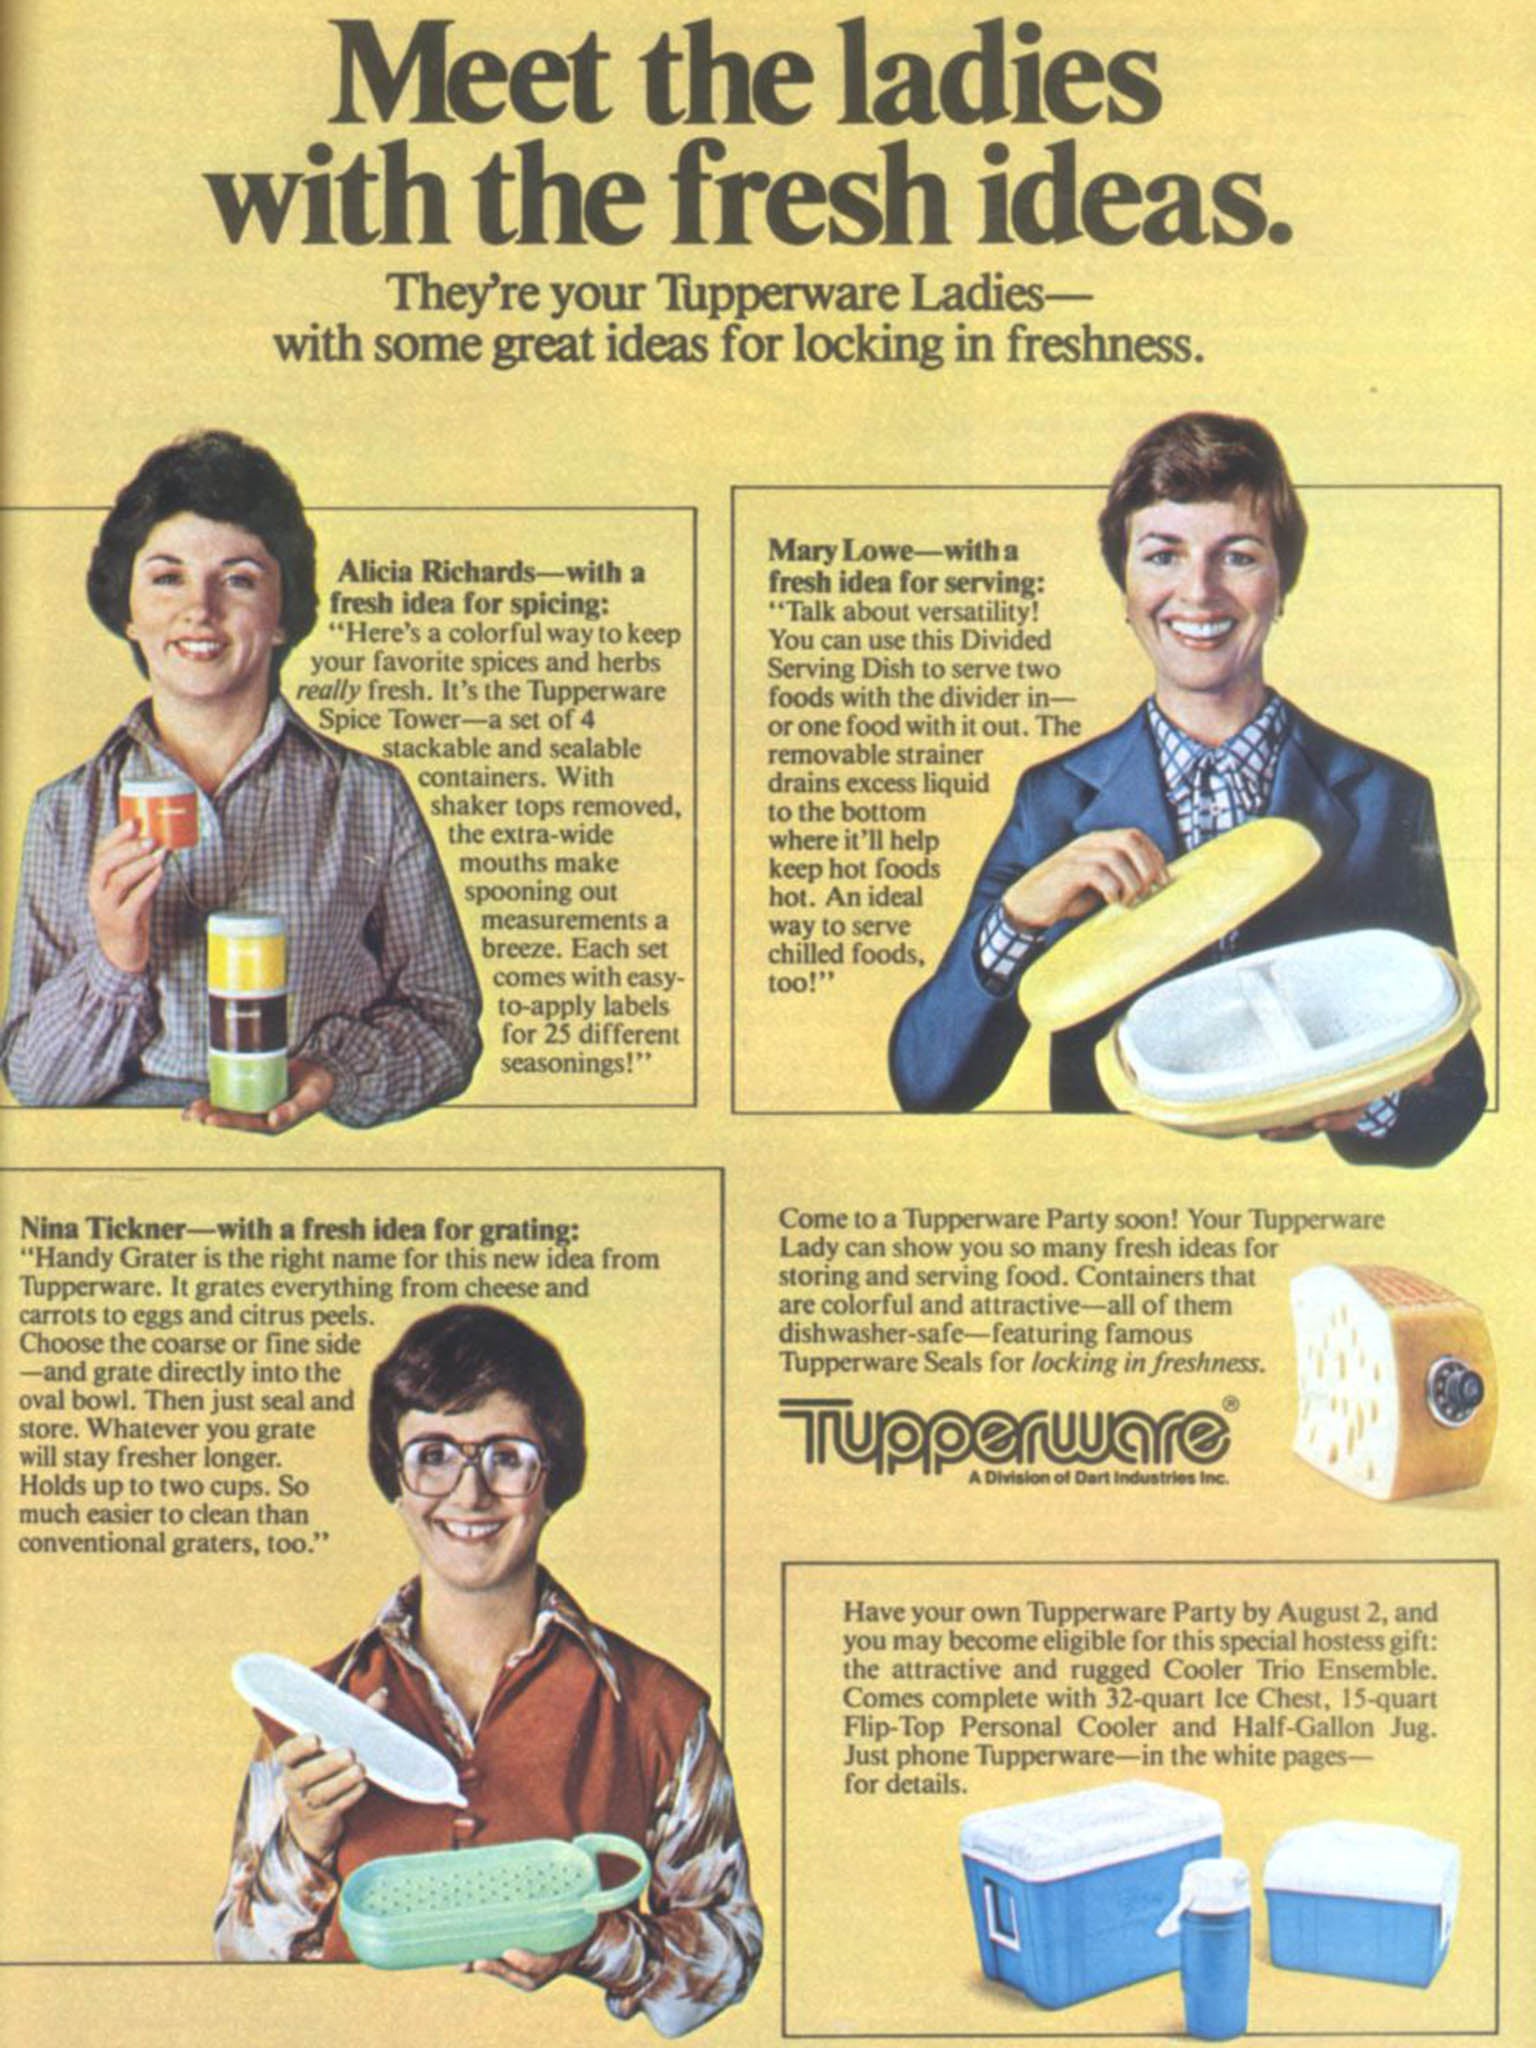 Counter culture: How Tupperware sealed its fate, The Independent